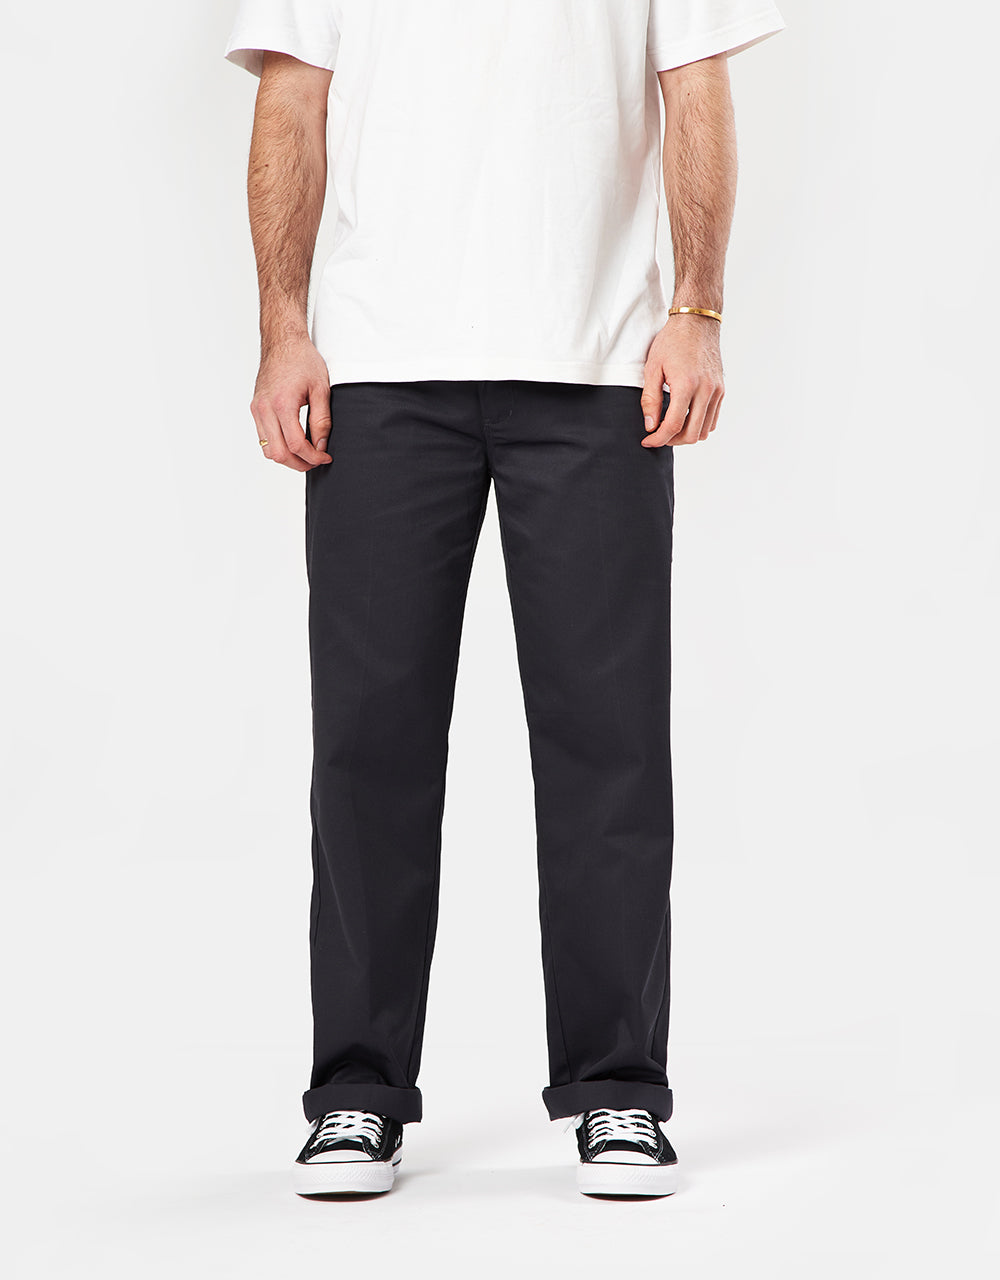 Route One x New Bristol Brewery Work Pant - Charcoal